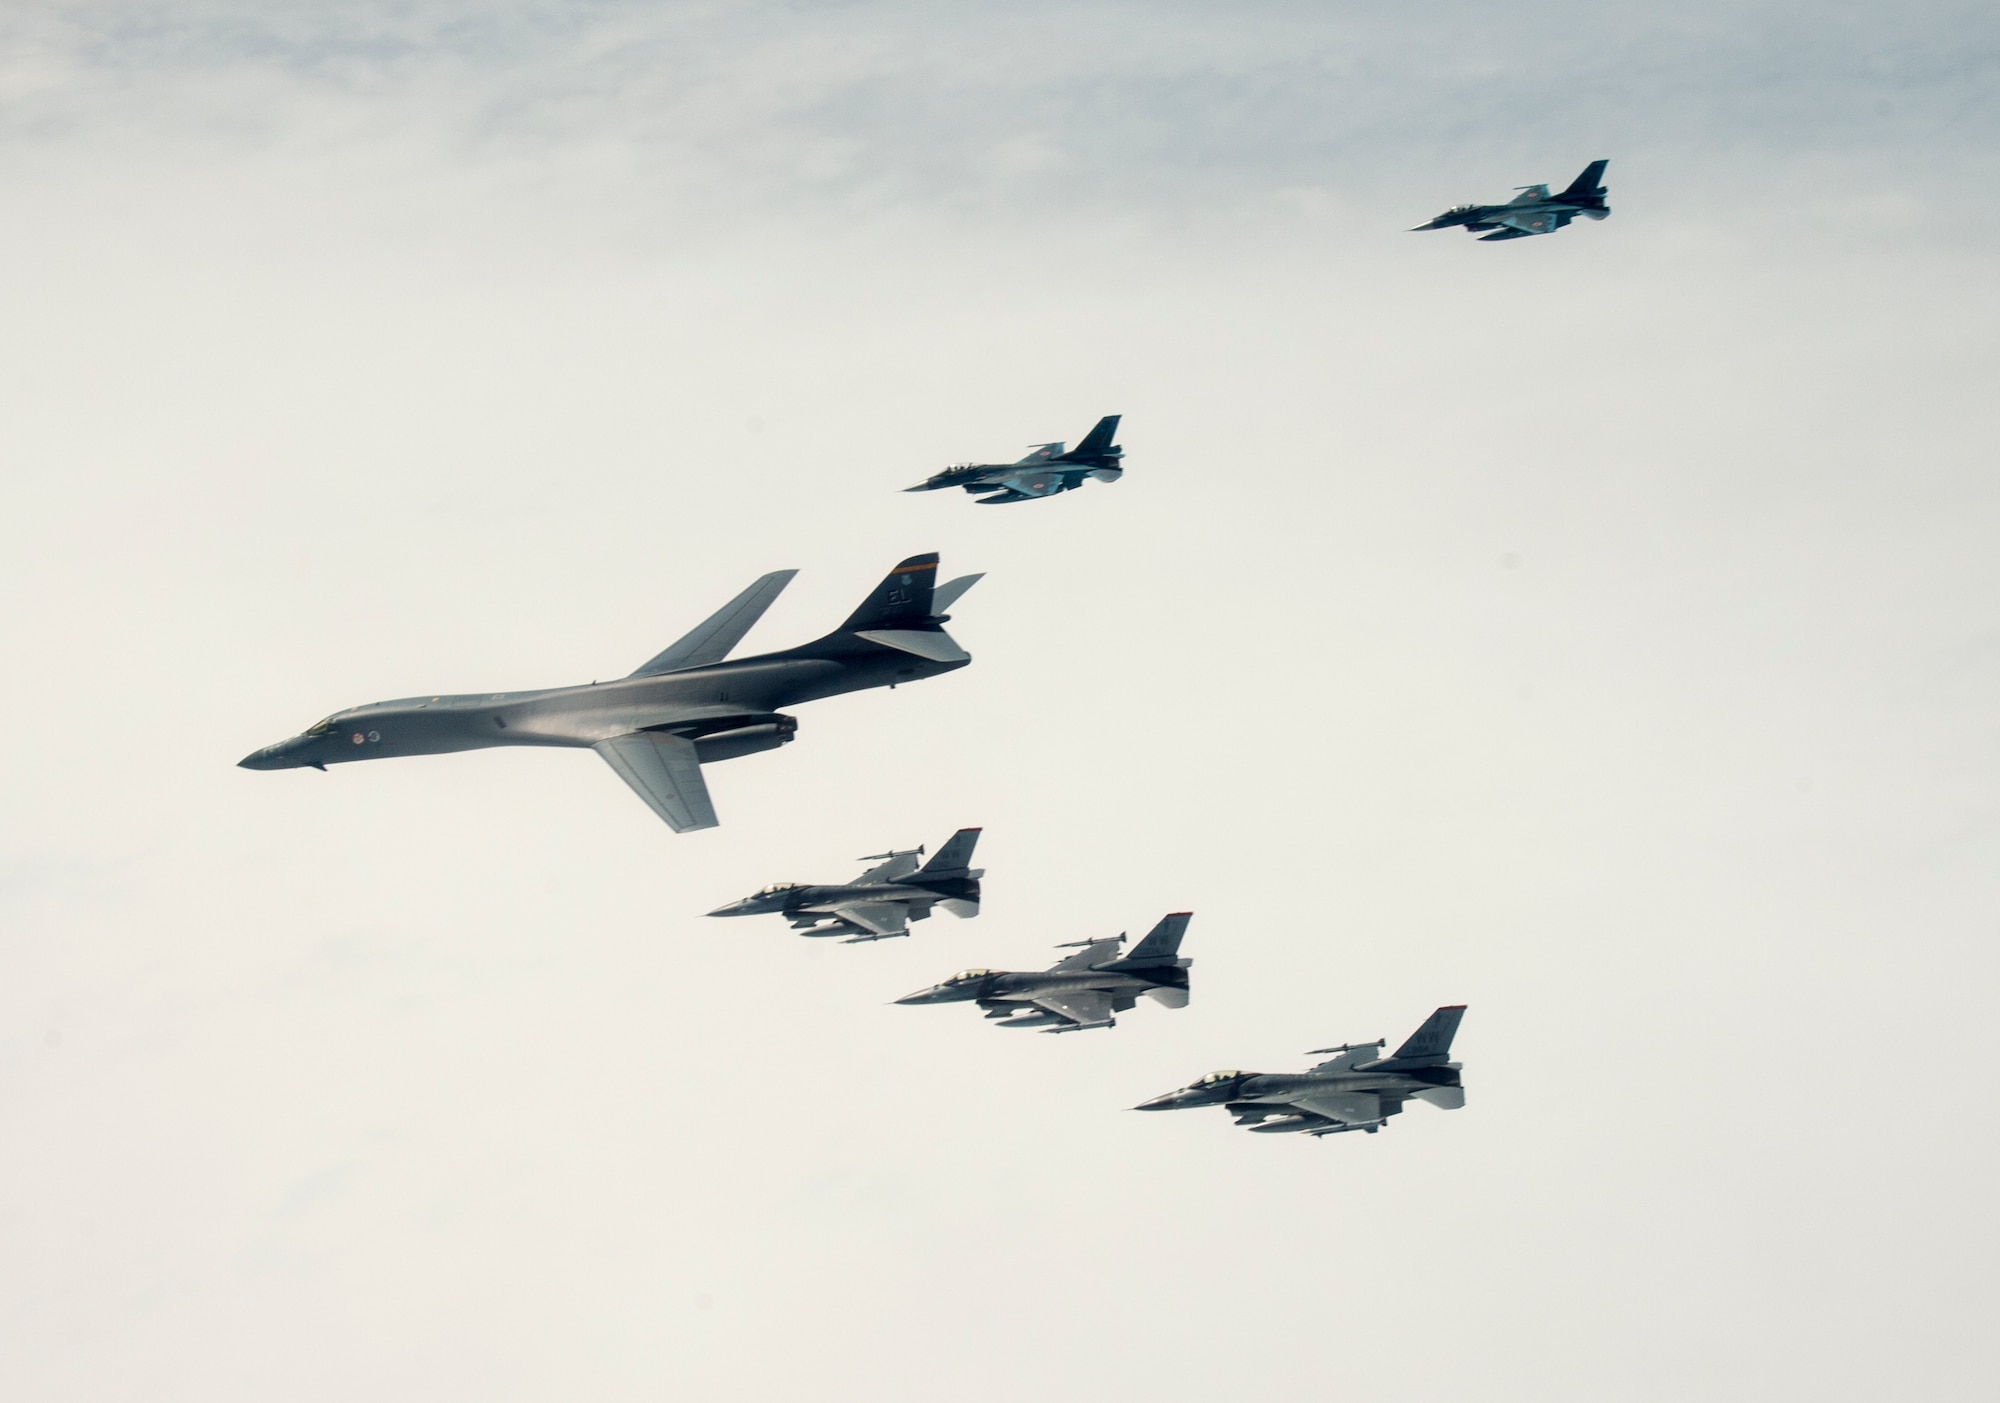 A U.S. Air Force B-1B Lancer from Ellsworth Air Force Base, S.D. and F-16 Fighting Falcons from Misawa Air Base, Japan, conducted bilateral joint training with Japan Air Self-Defense Force (JASDF) F-2s off the coast of Northern Japan, April 22, 2020. U.S. Strategic Command's bomber forces regularly conduct combined theater security cooperation engagements with allies and partners, demonstrating U.S. capability to command, control and conduct bomber missions around the world. (U.S. Air Force photo by Tech. Sgt. Timothy Moore)